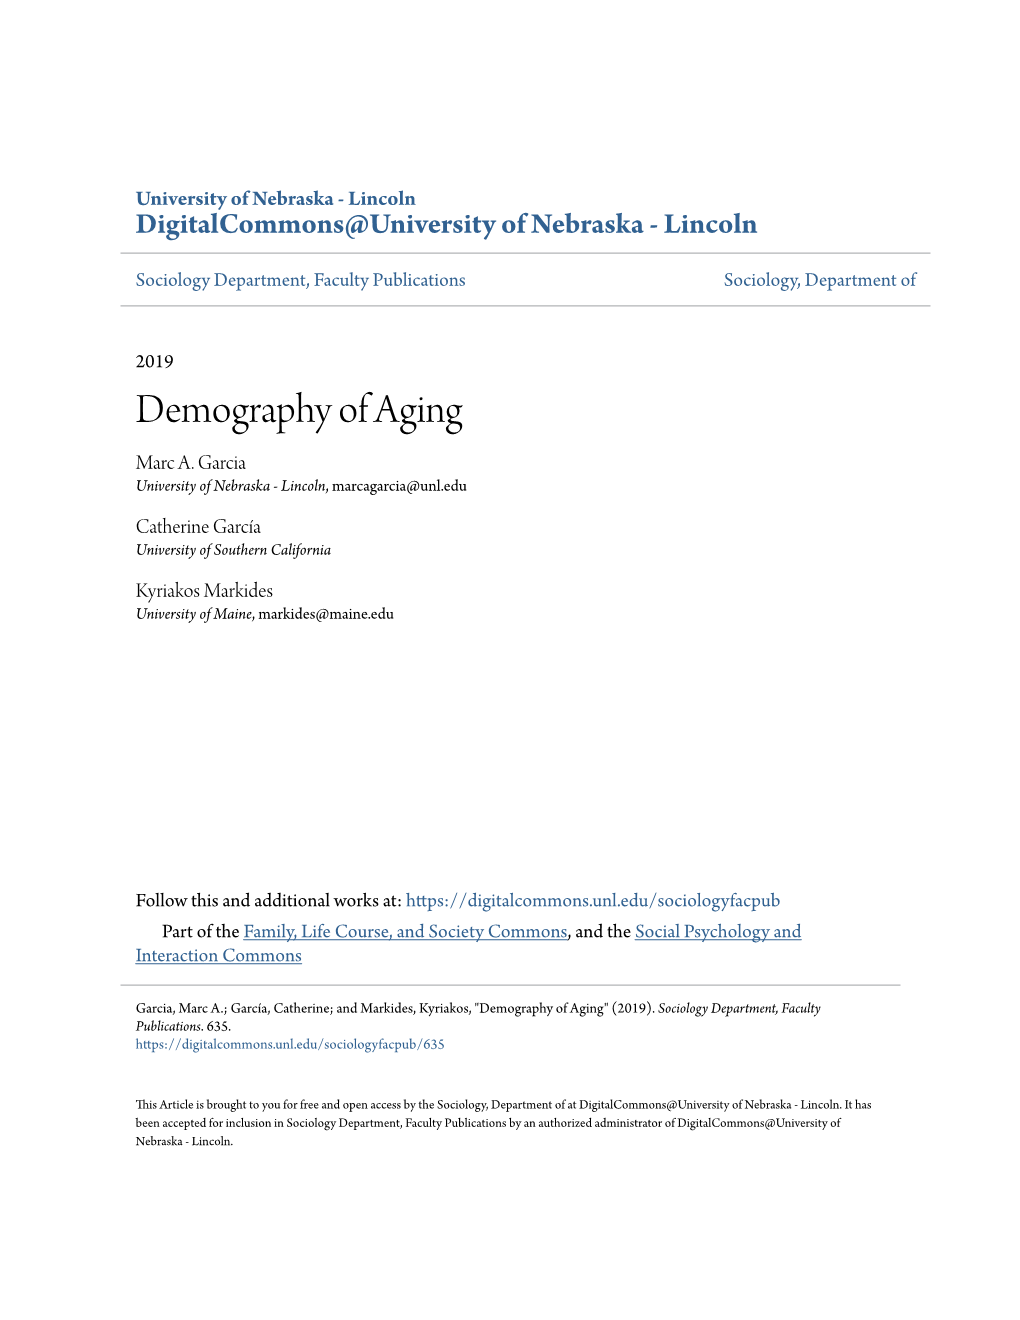 Demography of Aging Marc A